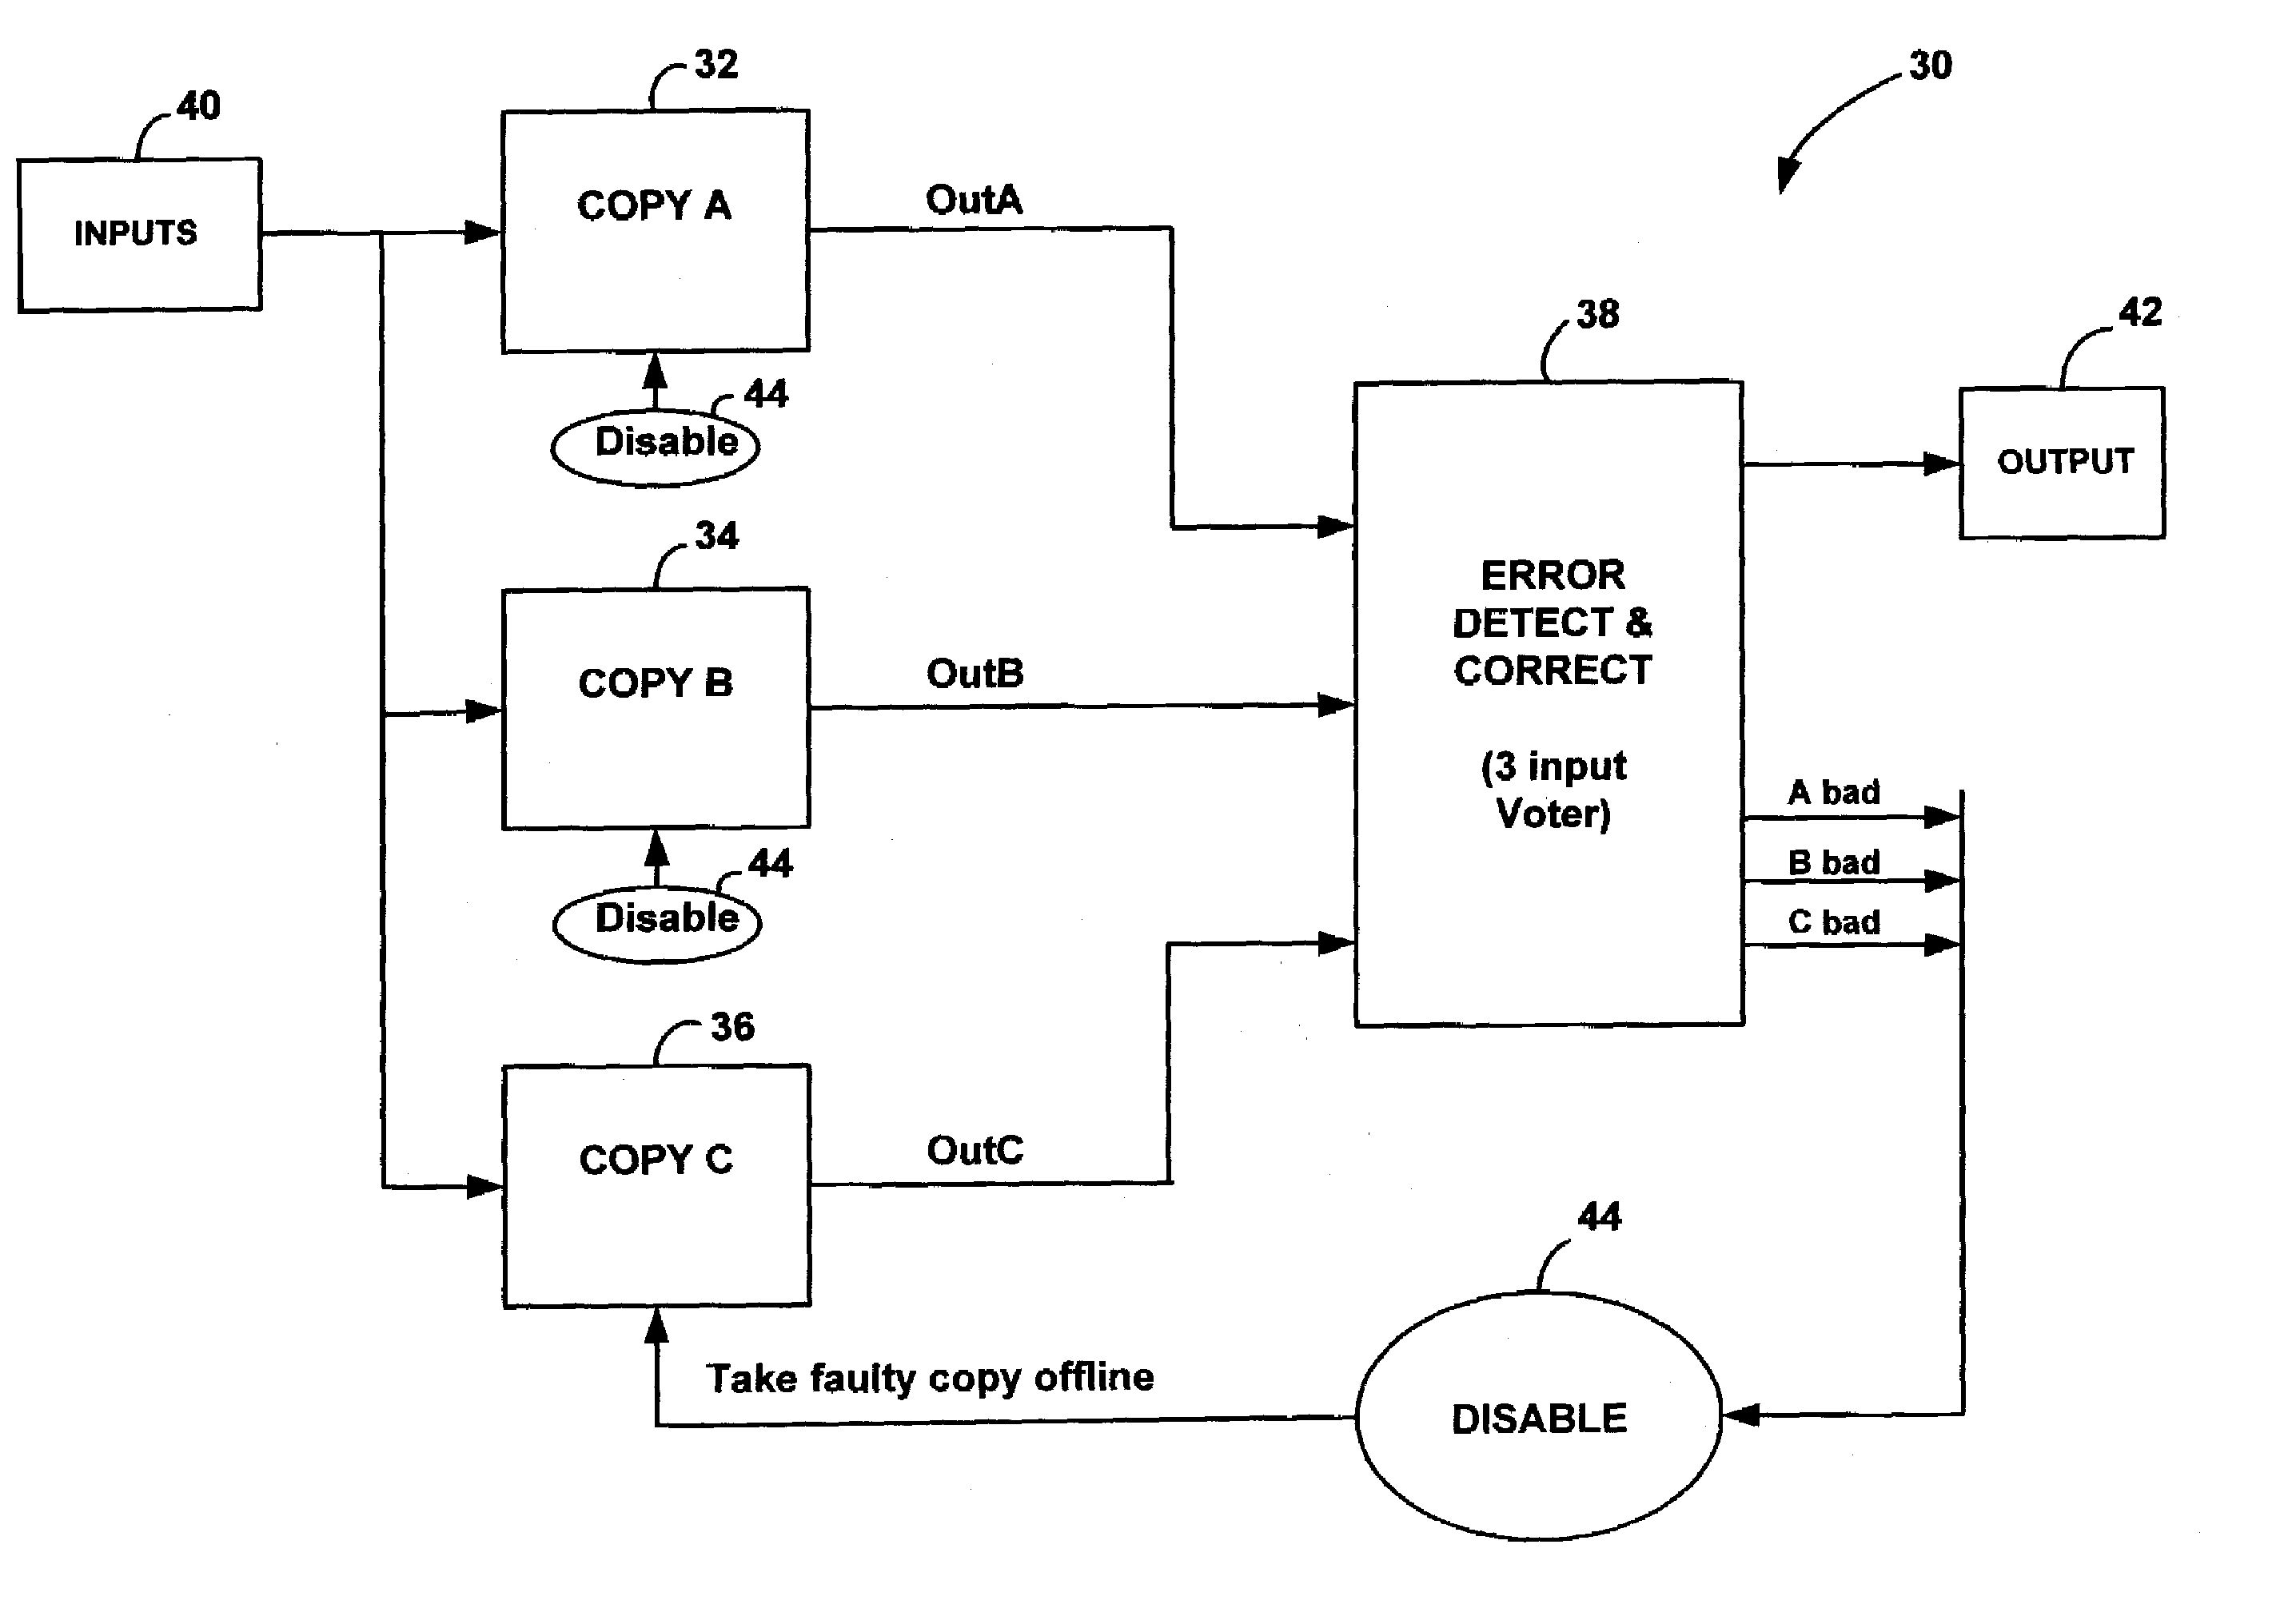 Method of selectively building redundant logic structures to improve fault tolerance